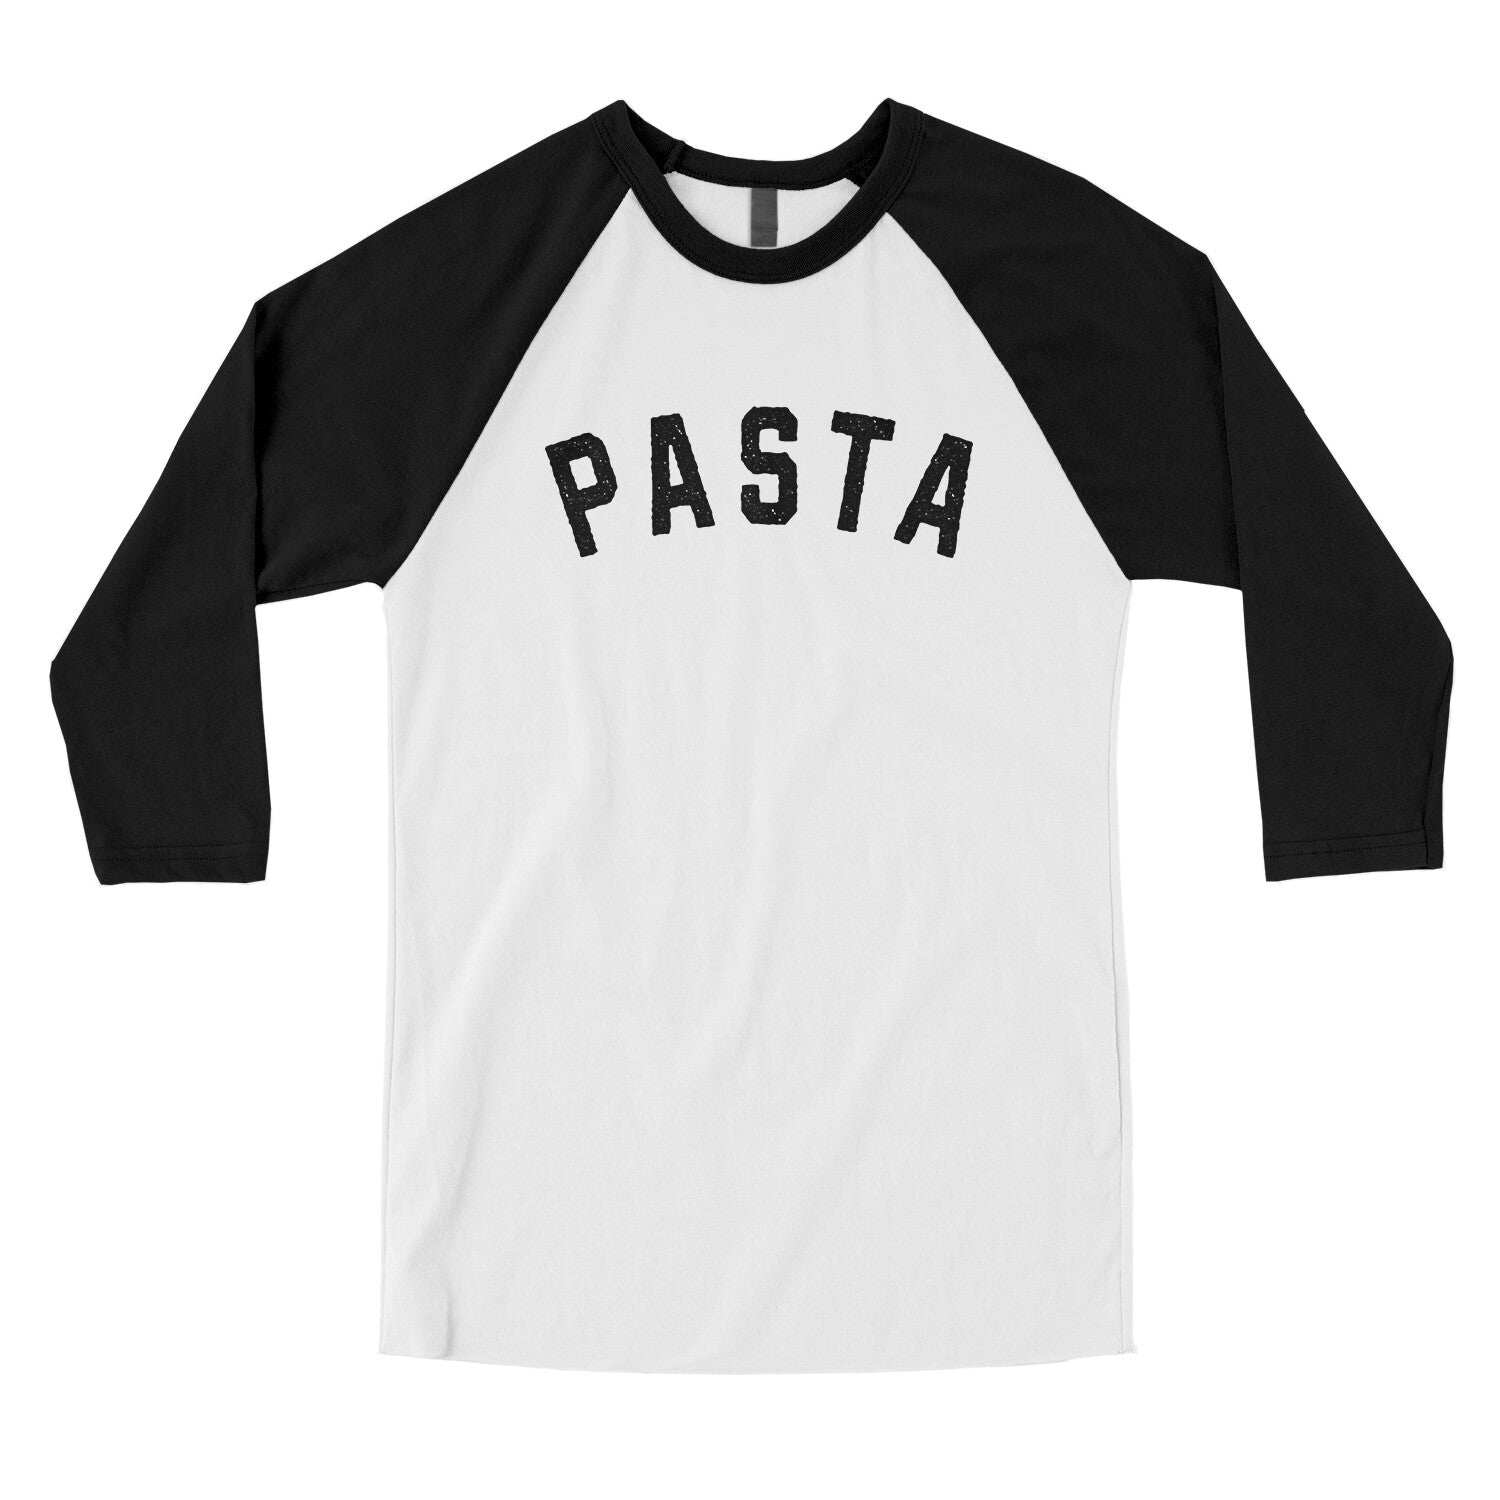 Pasta in White with Black Color